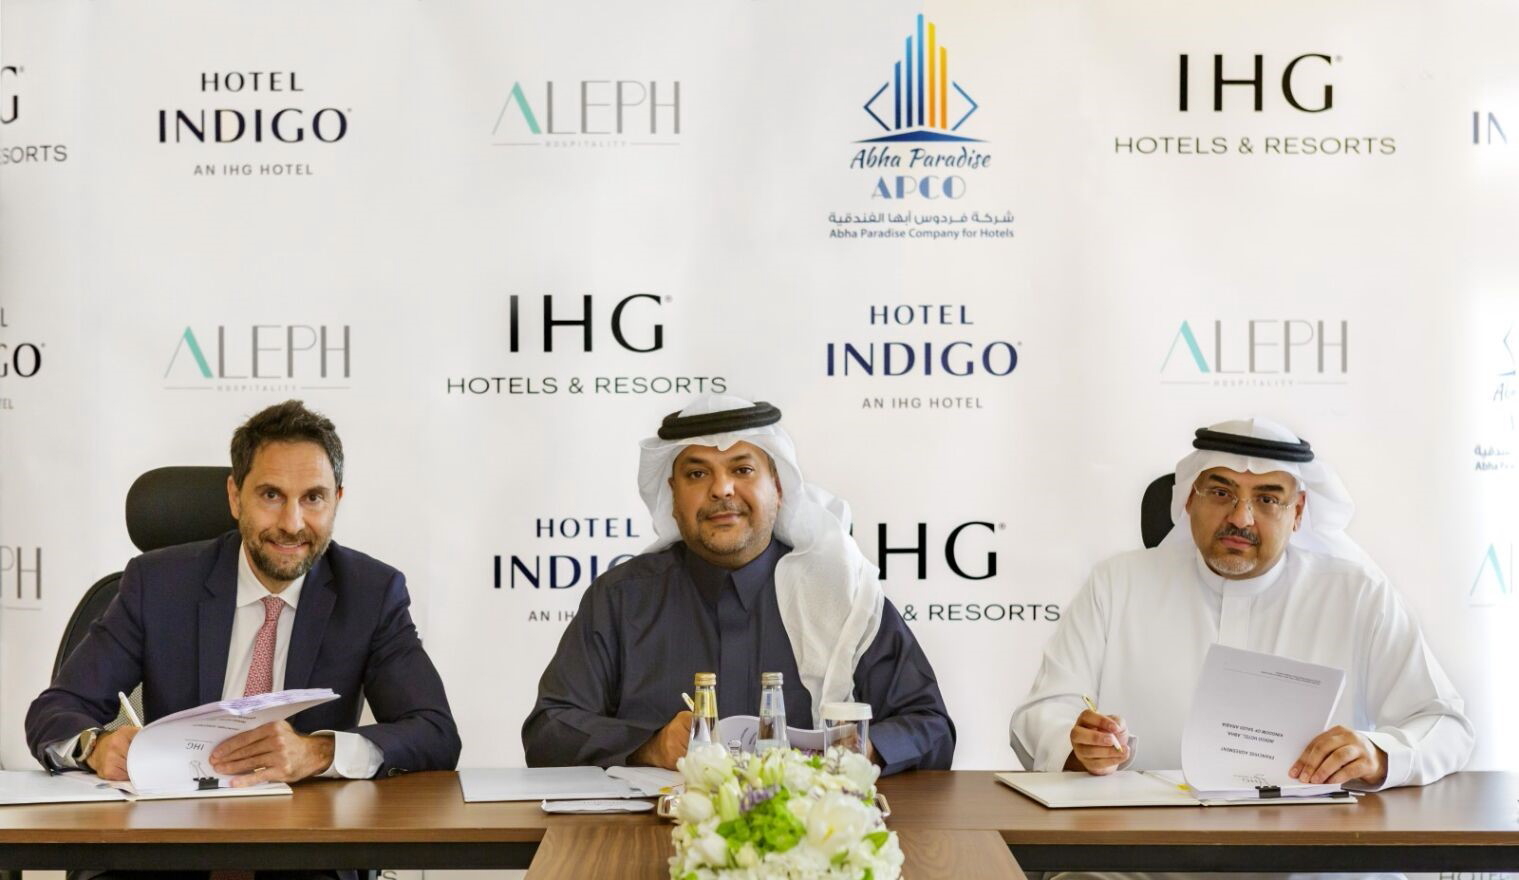 IHG signs franchise agreement for a hotel in Abha, Saudi Arabia. Click to enlarge.